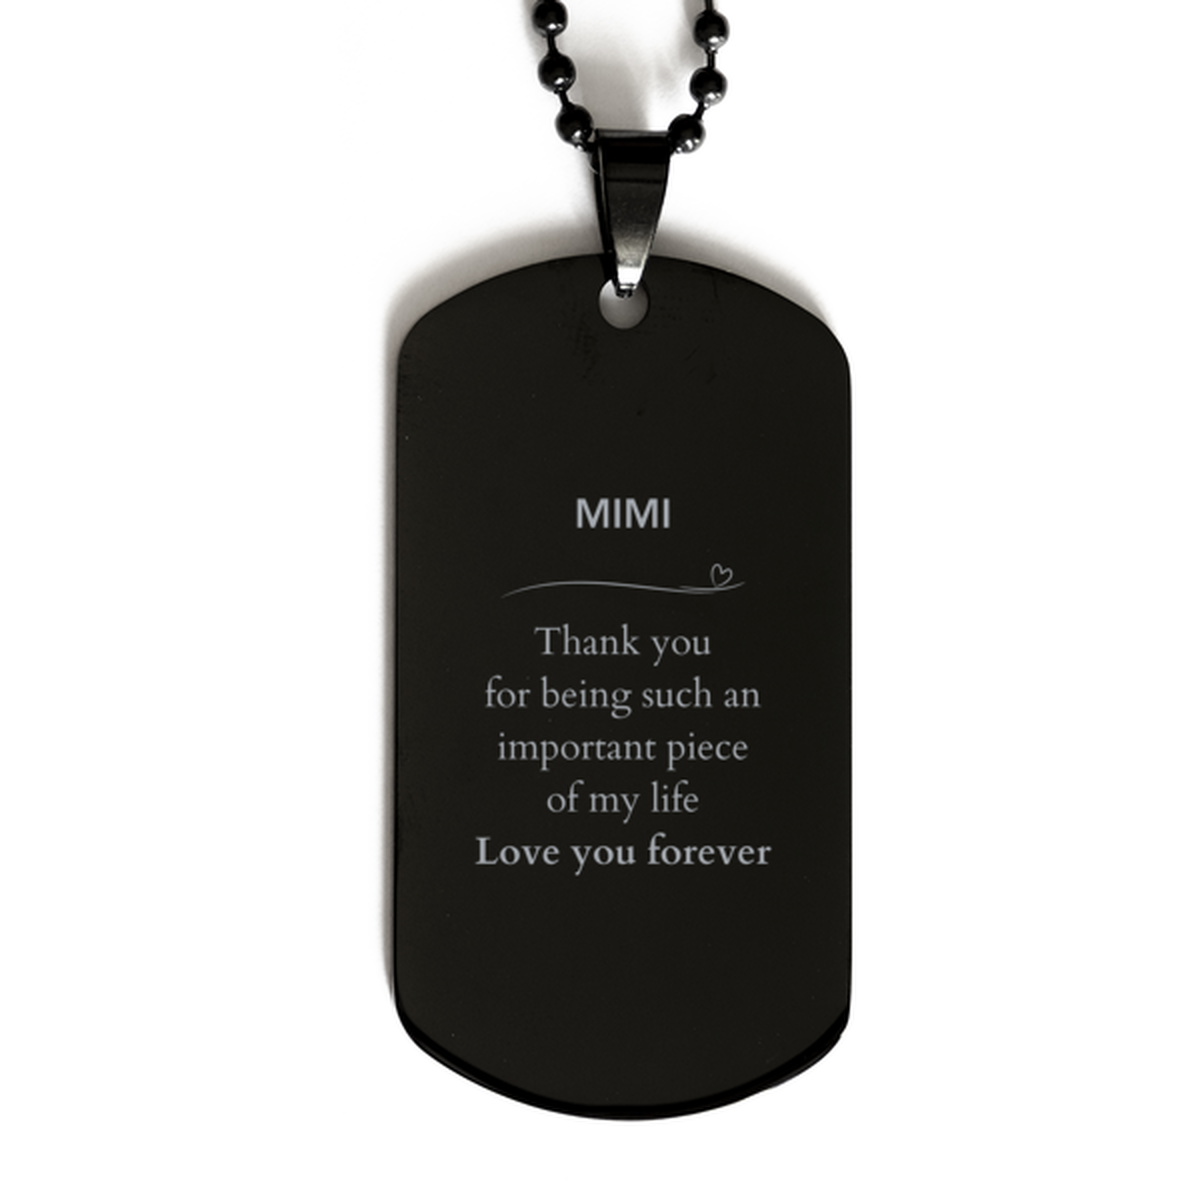 Appropriate Mimi Black Dog Tag Epic Birthday Gifts for Mimi Thank you for being such an important piece of my life Mimi Christmas Mothers Fathers Day